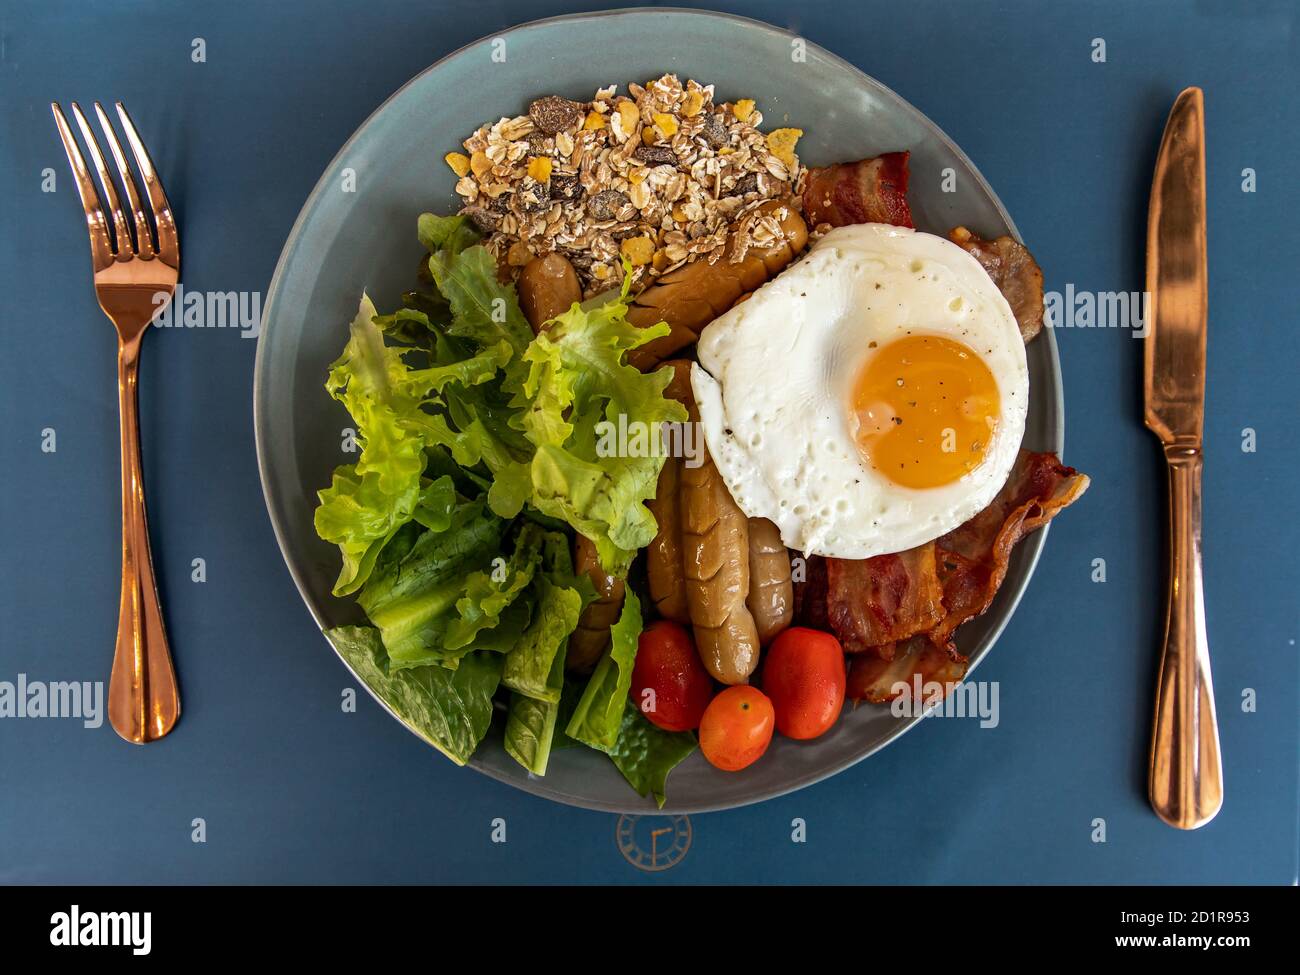 Continental breakfast with fried egg, fried sausages, vegetable on white plate. Selective focuse. Stock Photo